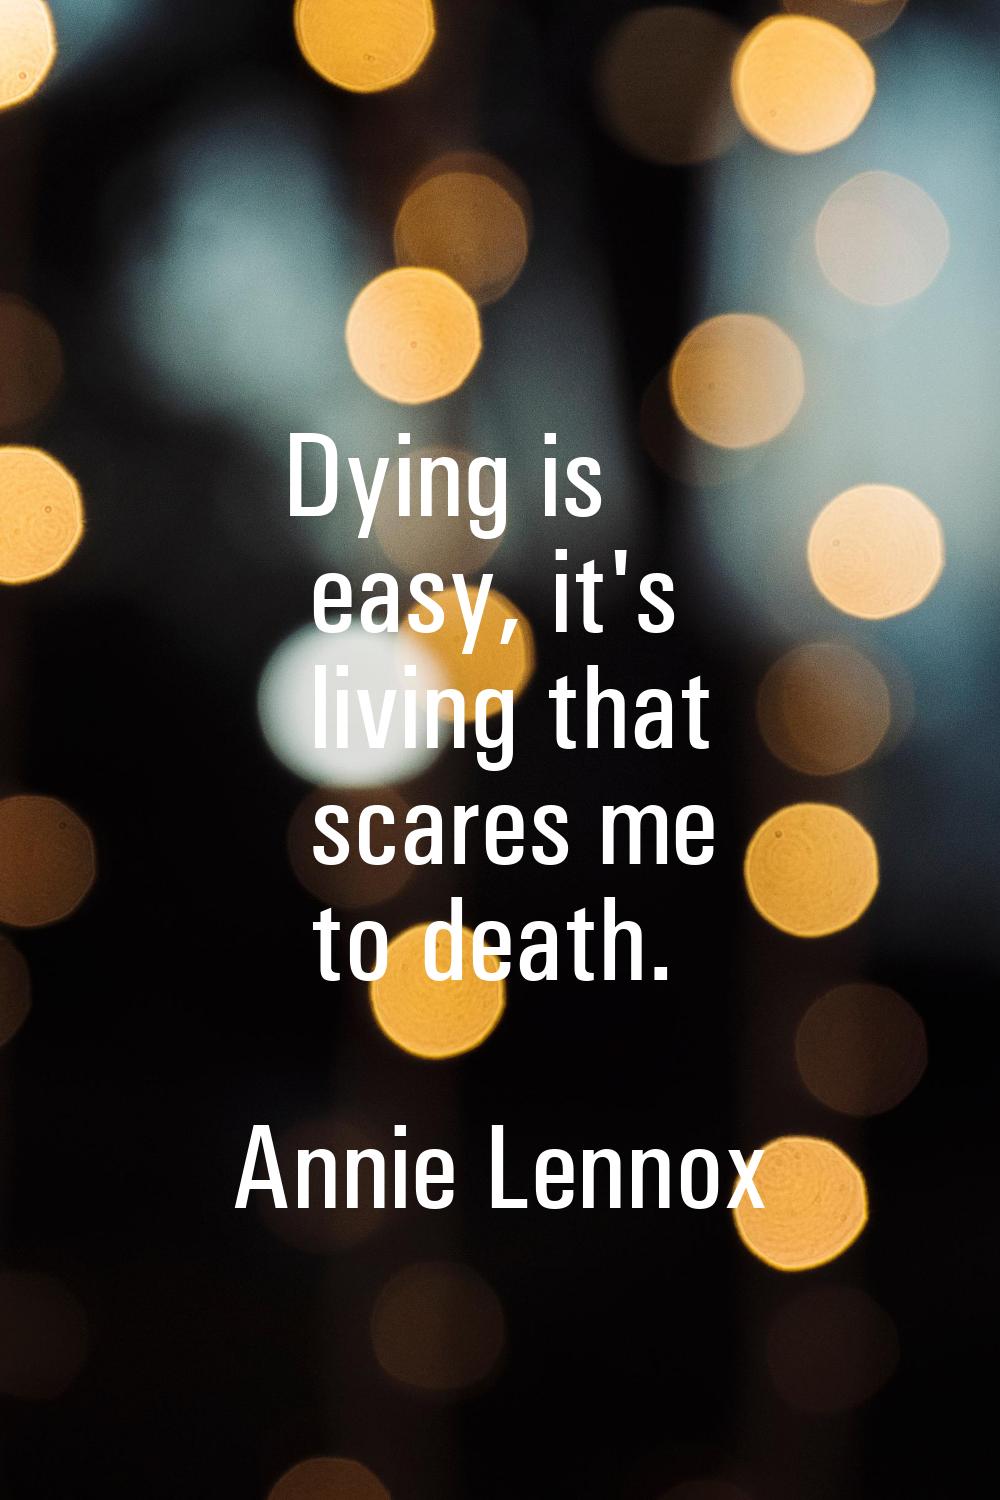 Dying is easy, it's living that scares me to death.